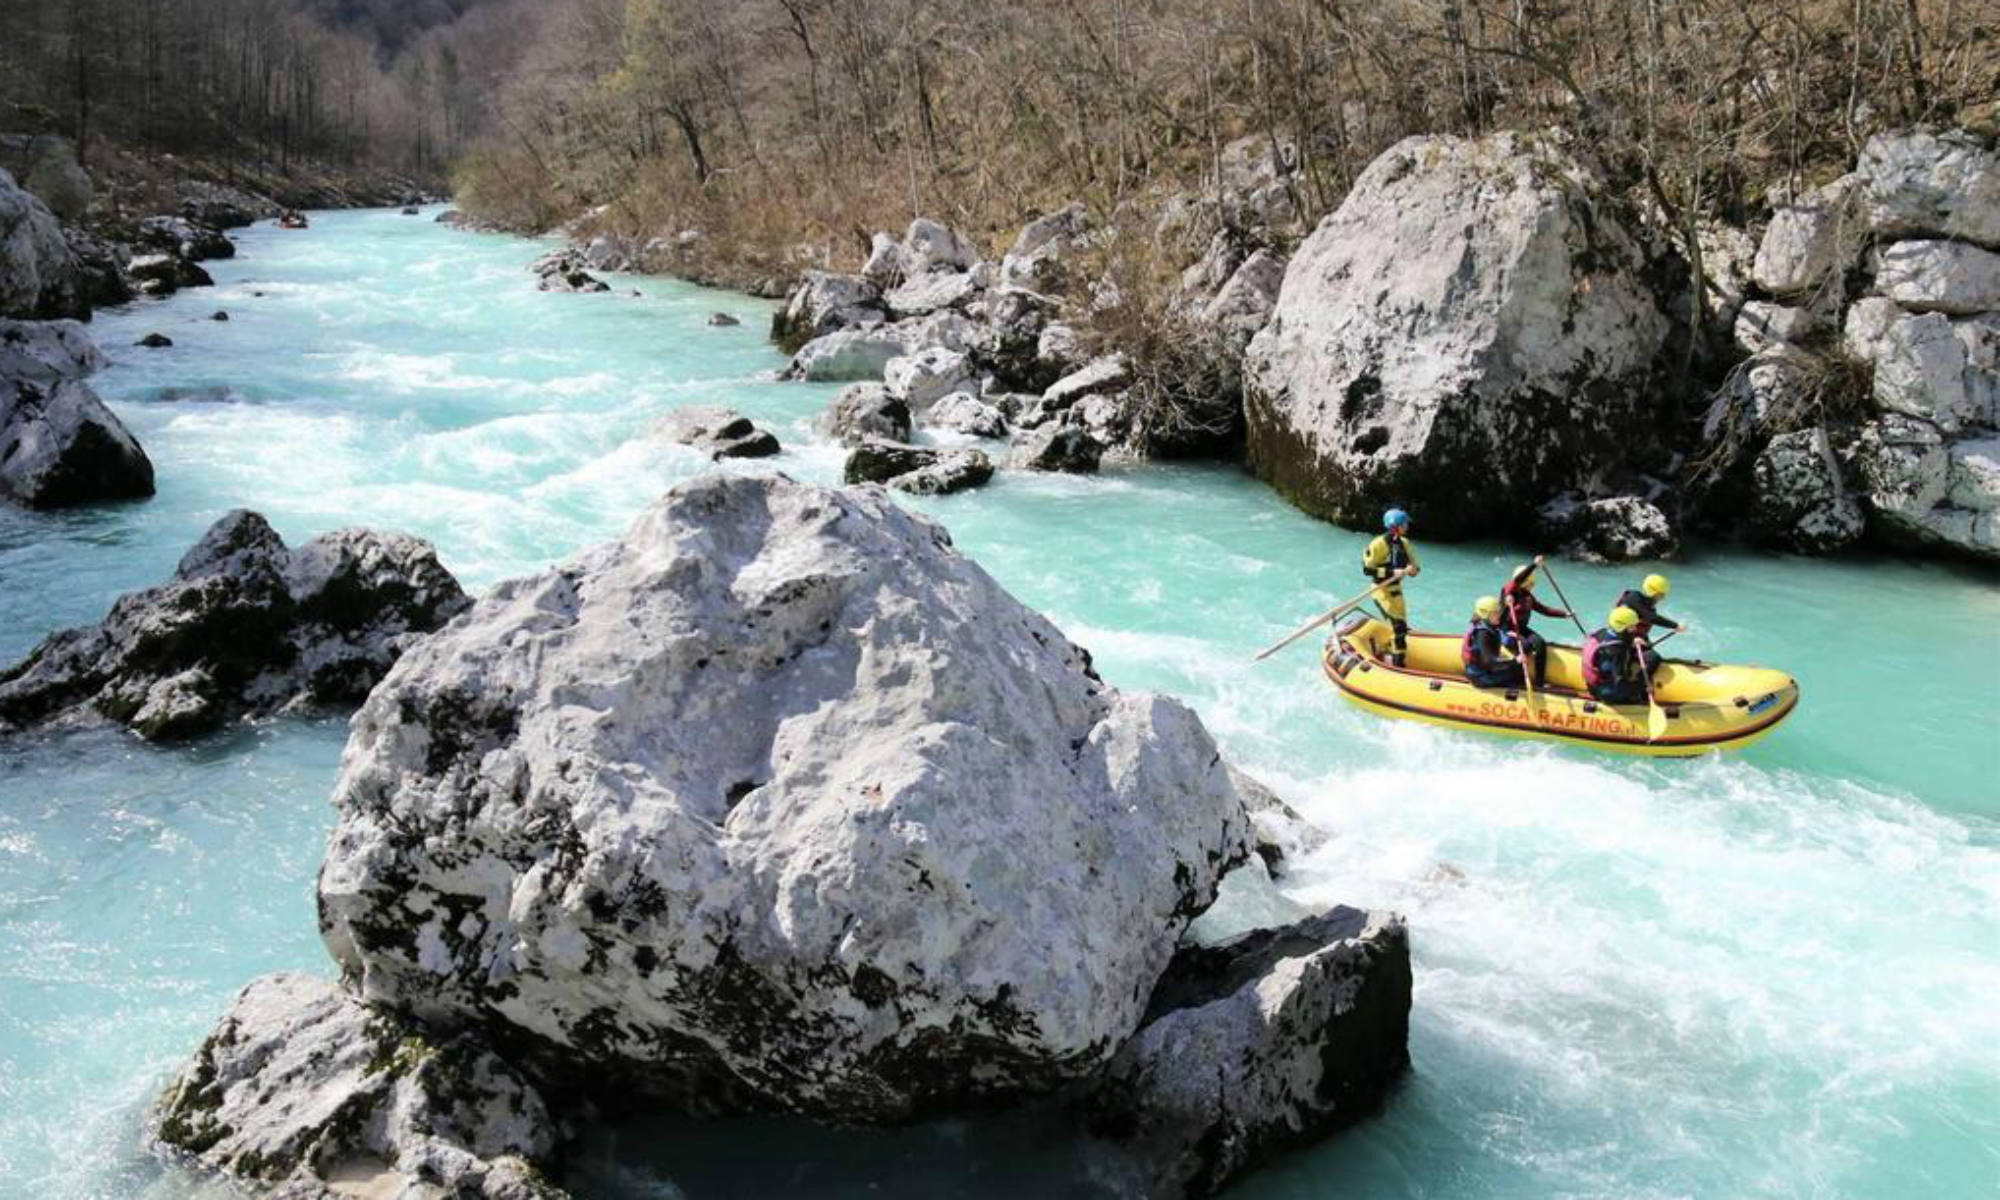 A group of people dodging the rocks in the water while rafting on the Soča River.